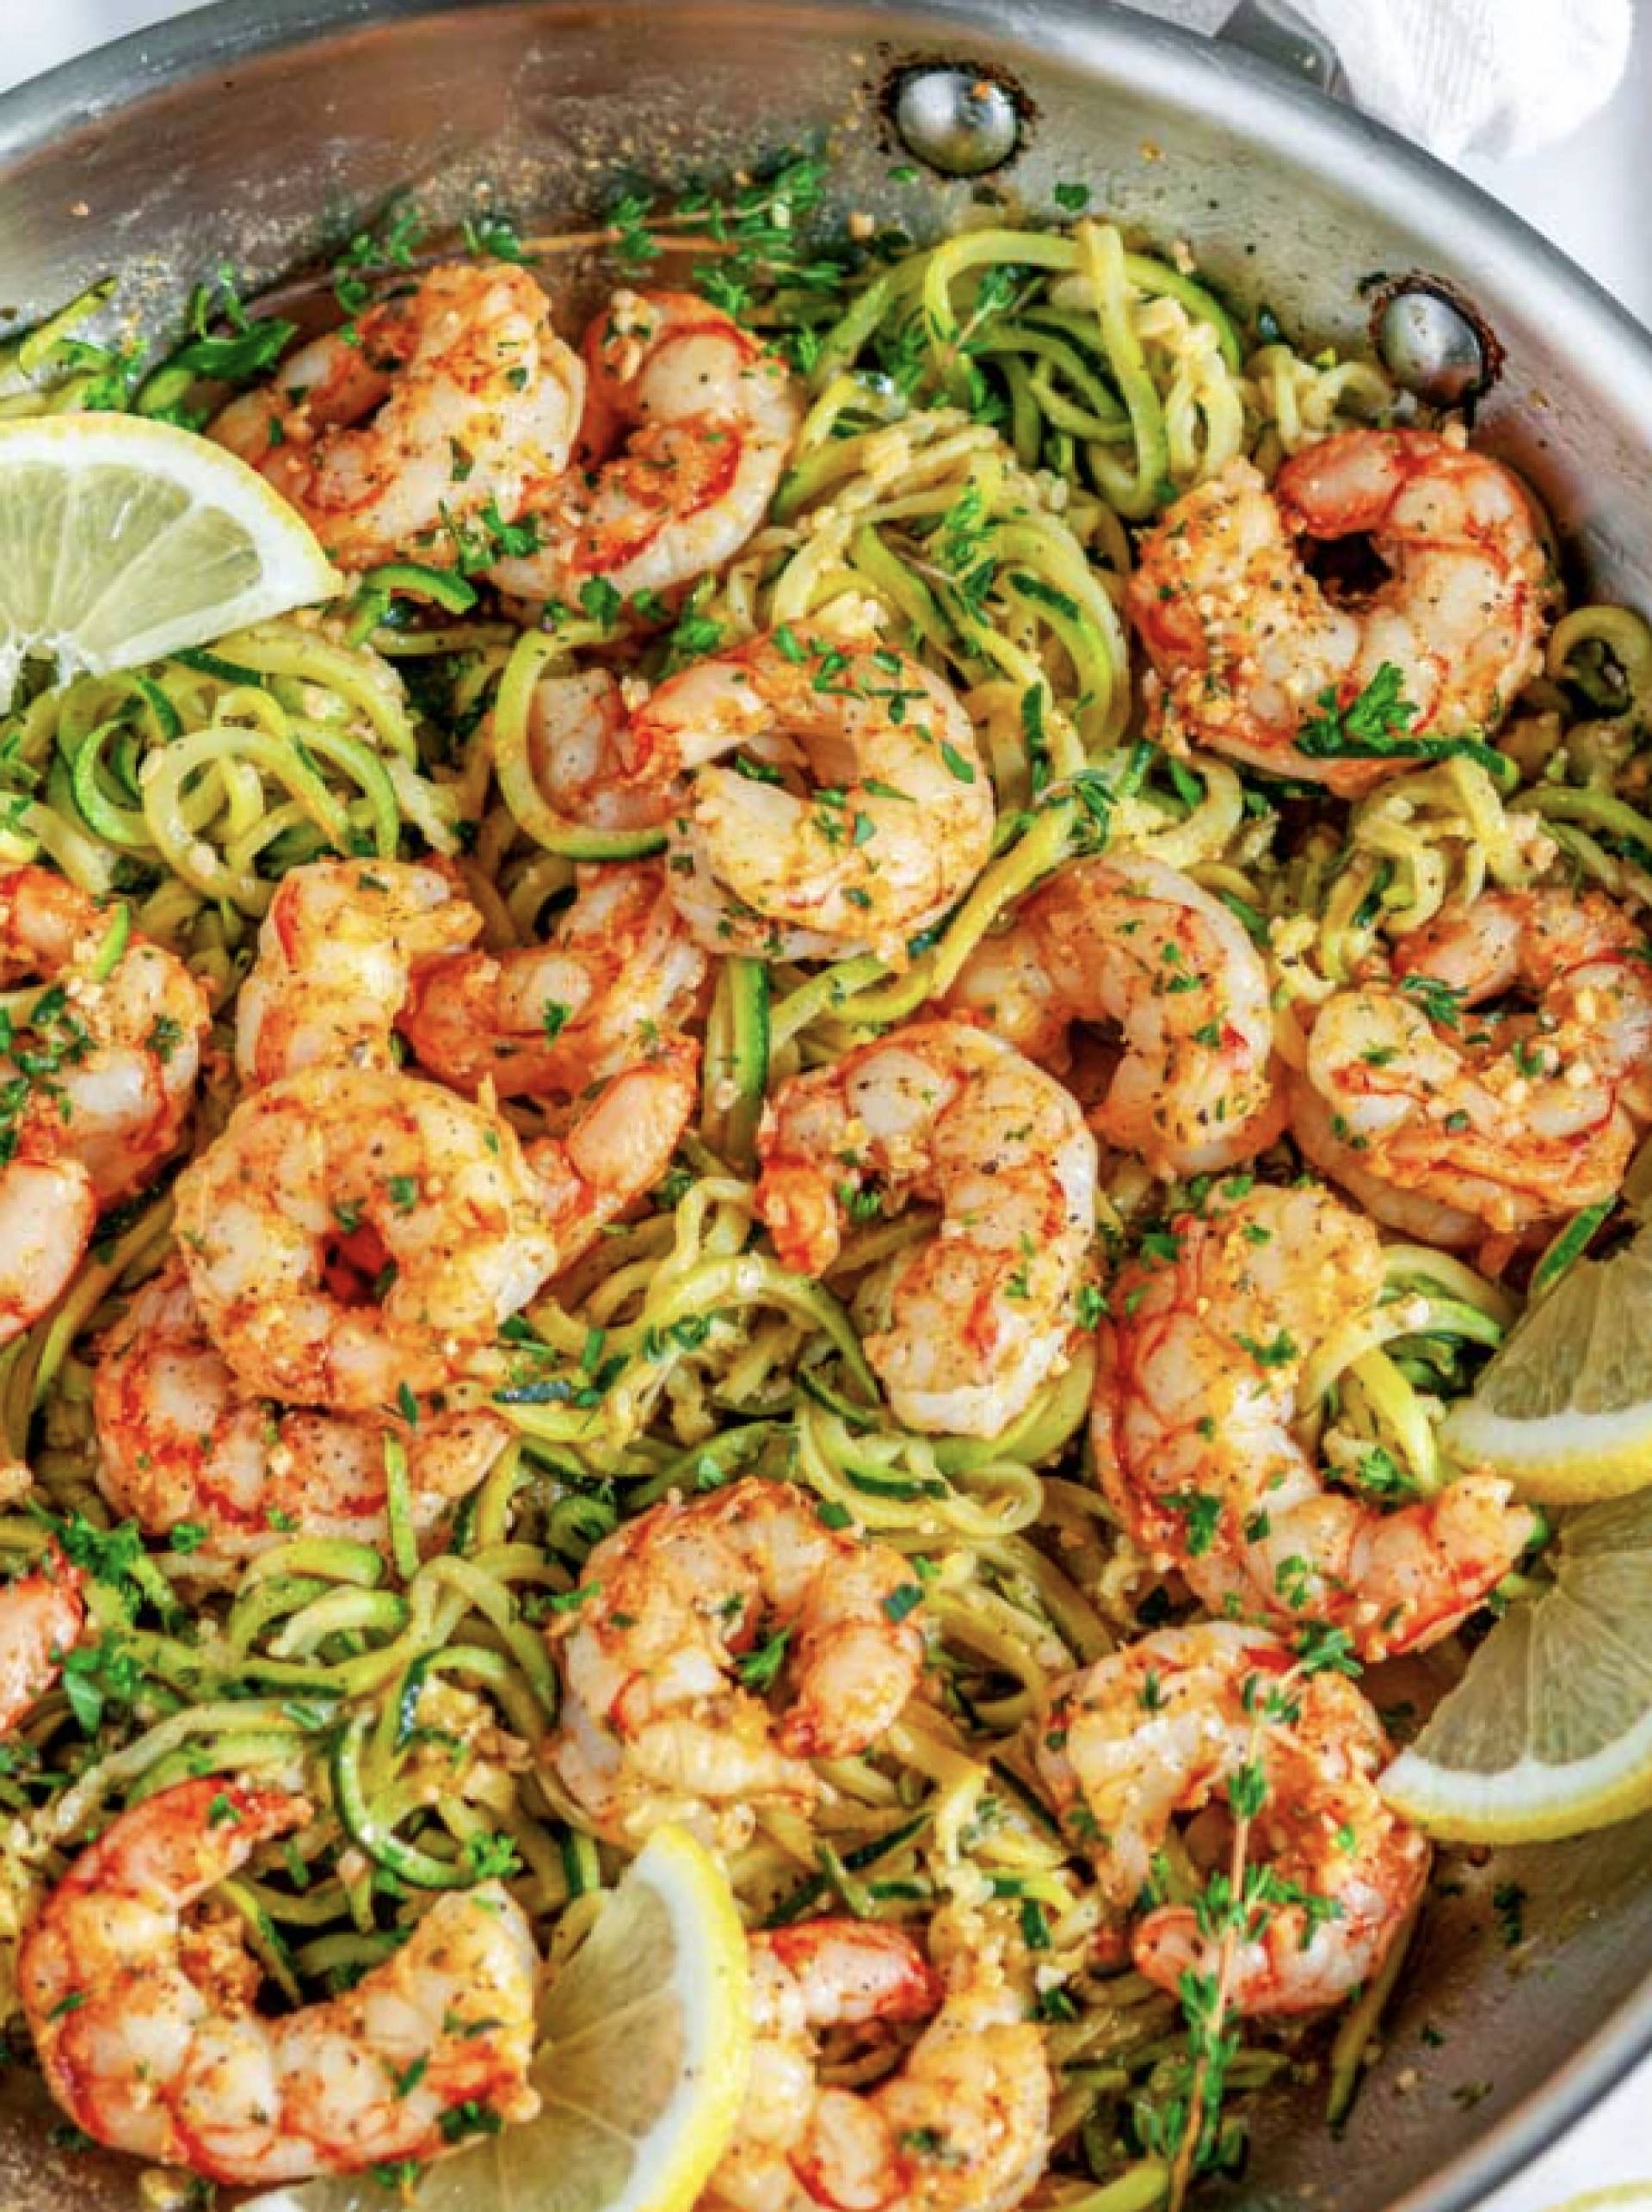 House Shrimp over Zucchini Noodles with Baby Spinach (GL)